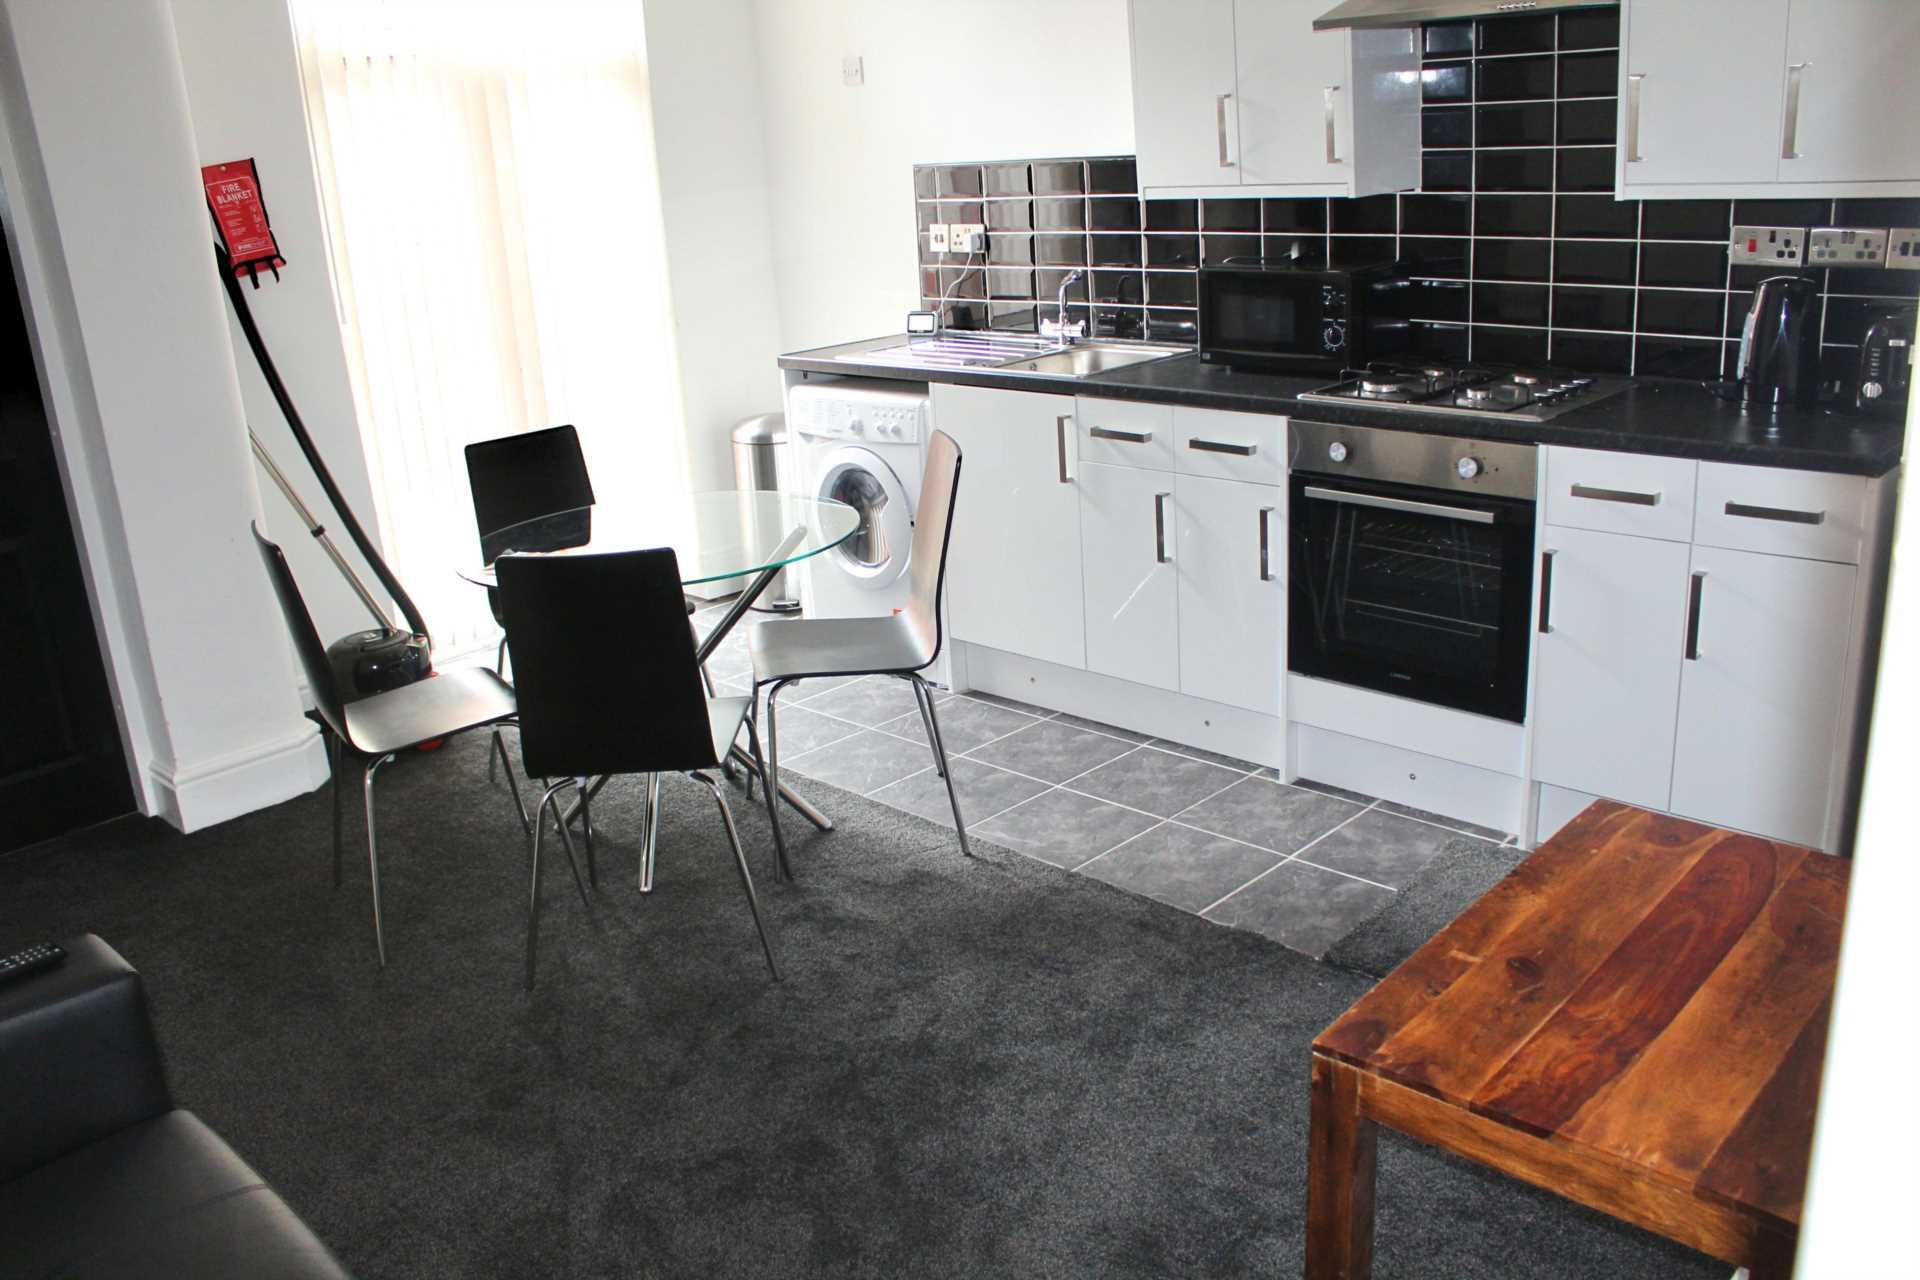 4 bed Room for rent in Salford. From Student Haus